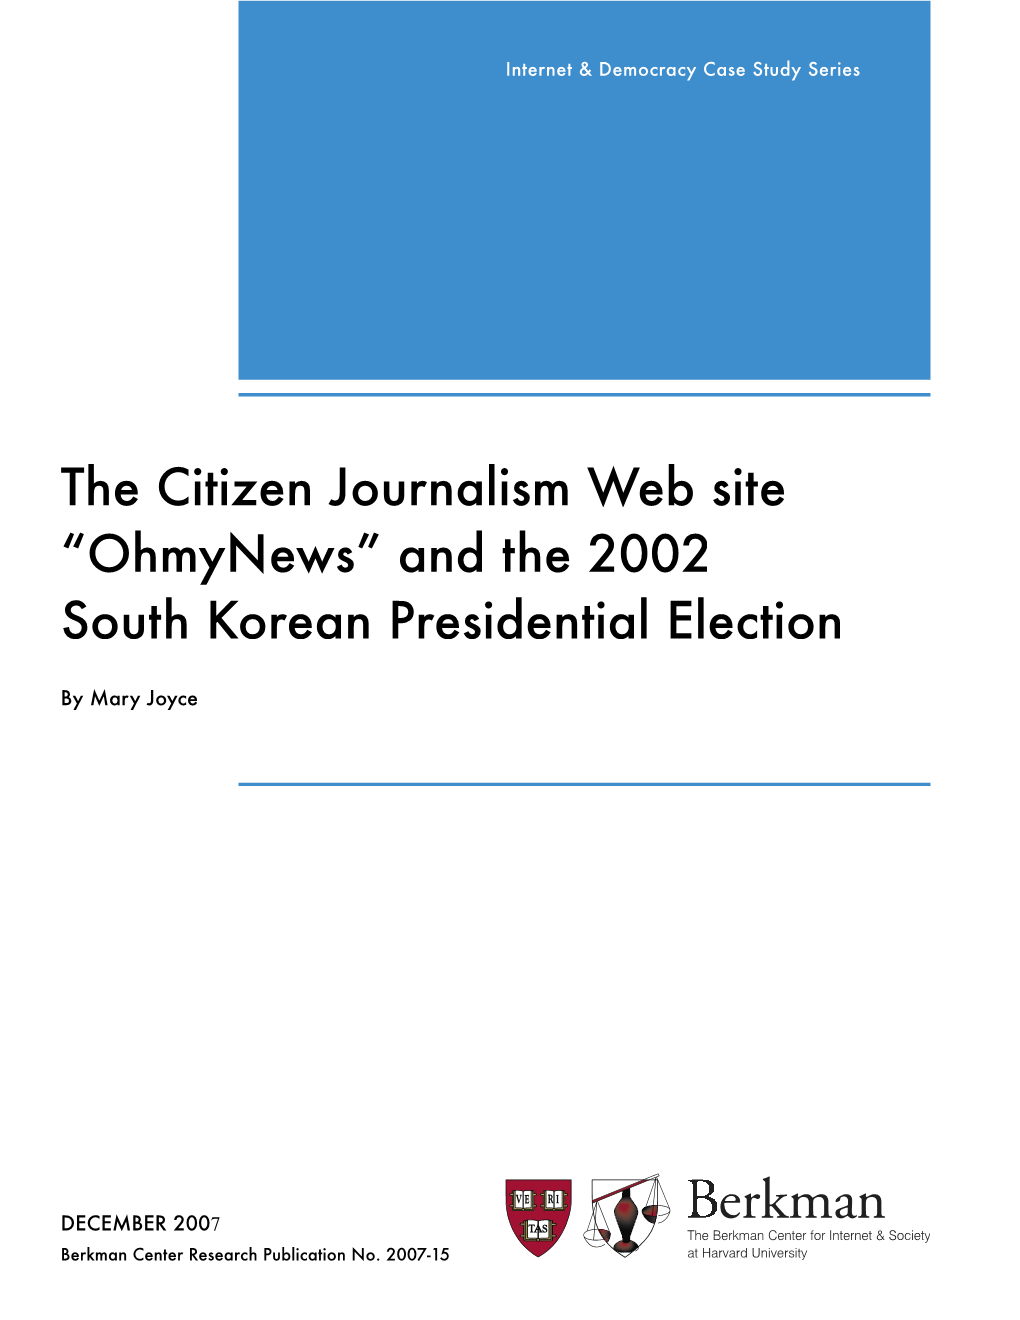 Ohmynews” and the 2002 South Korean Presidential Election